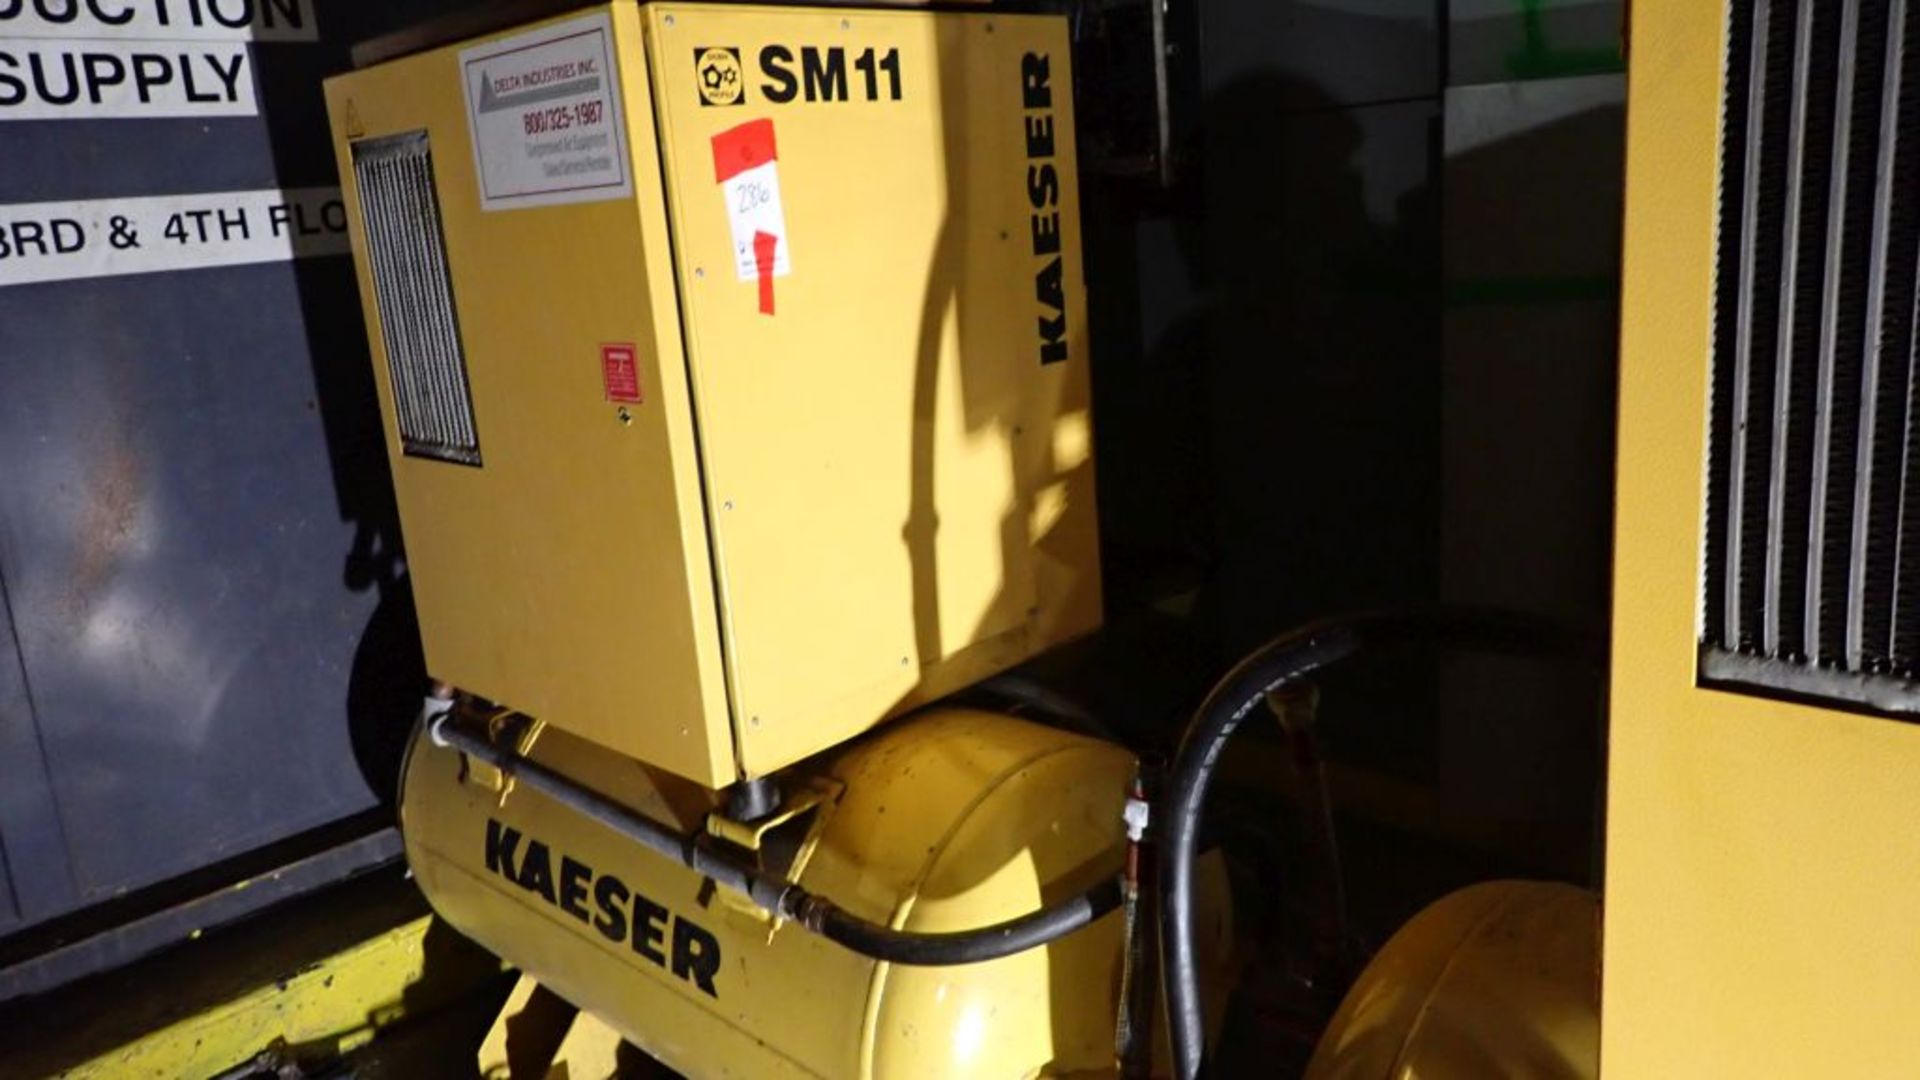 Kaeser SM11 Air Compressor | 11997 Hours; Tag: 241286; Lot Loading Fee: $25.00 - Image 3 of 4